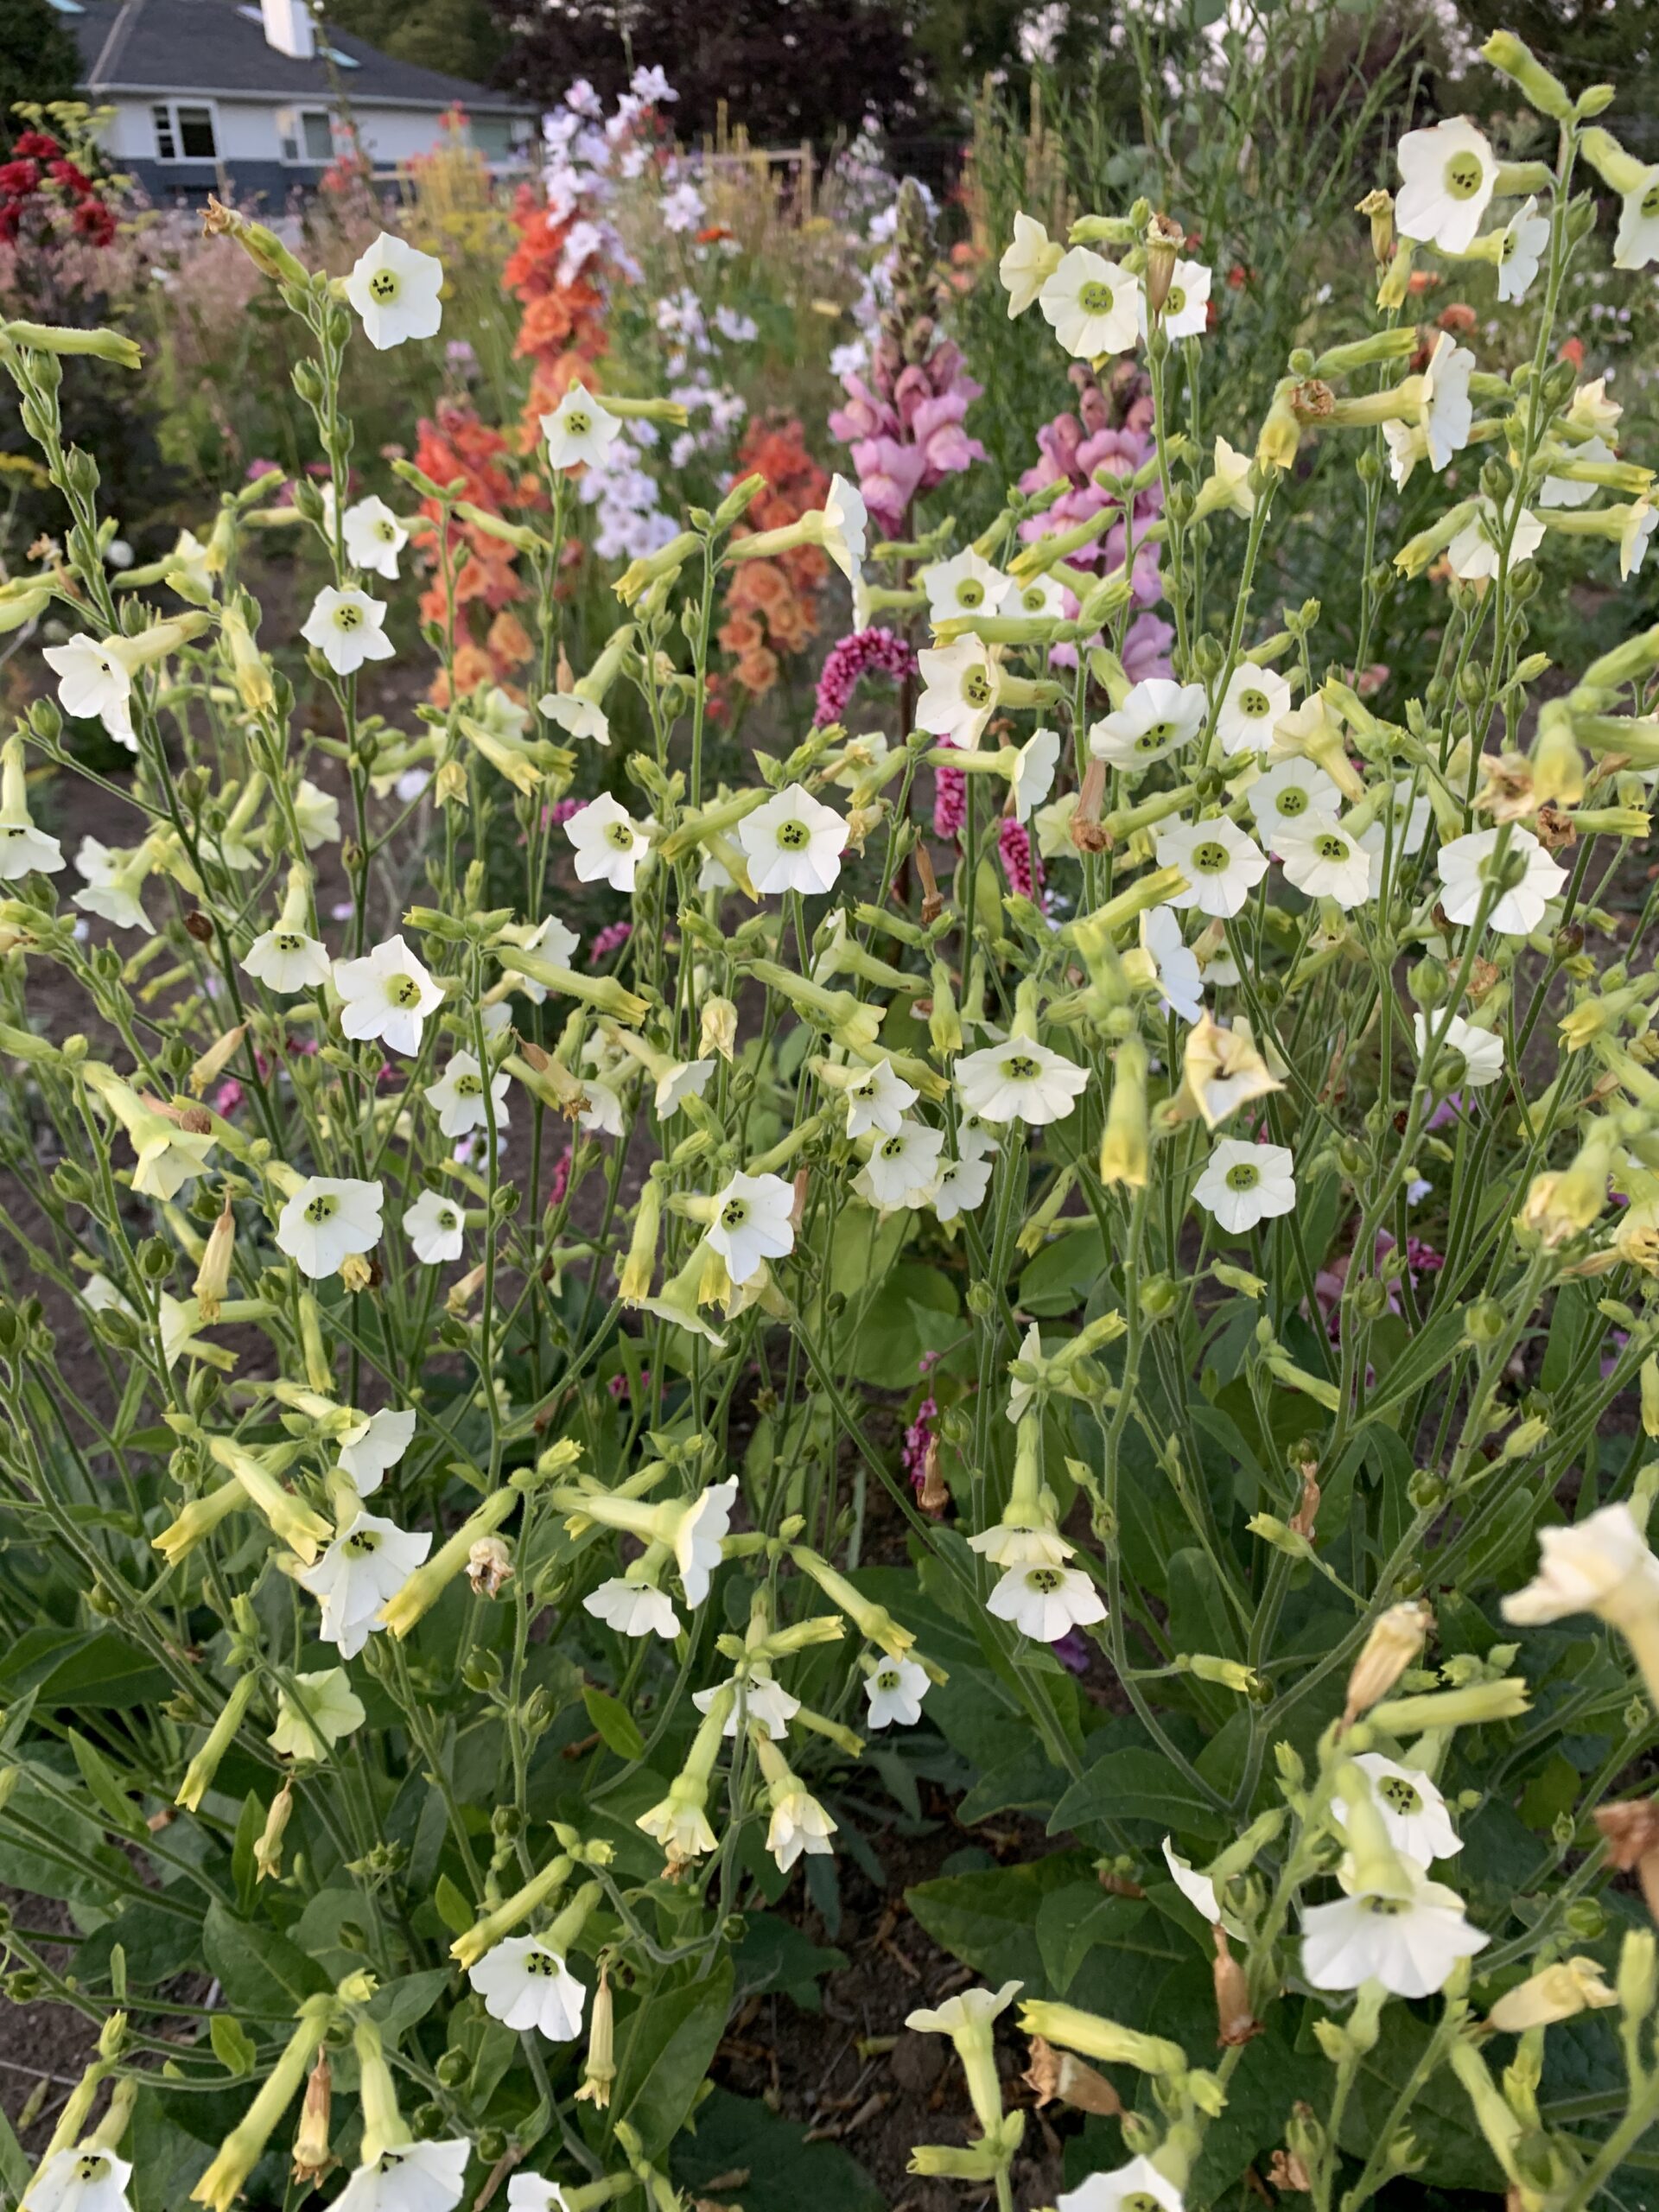 Nicotiana ‘Starlight Dancer’ in the trial patch